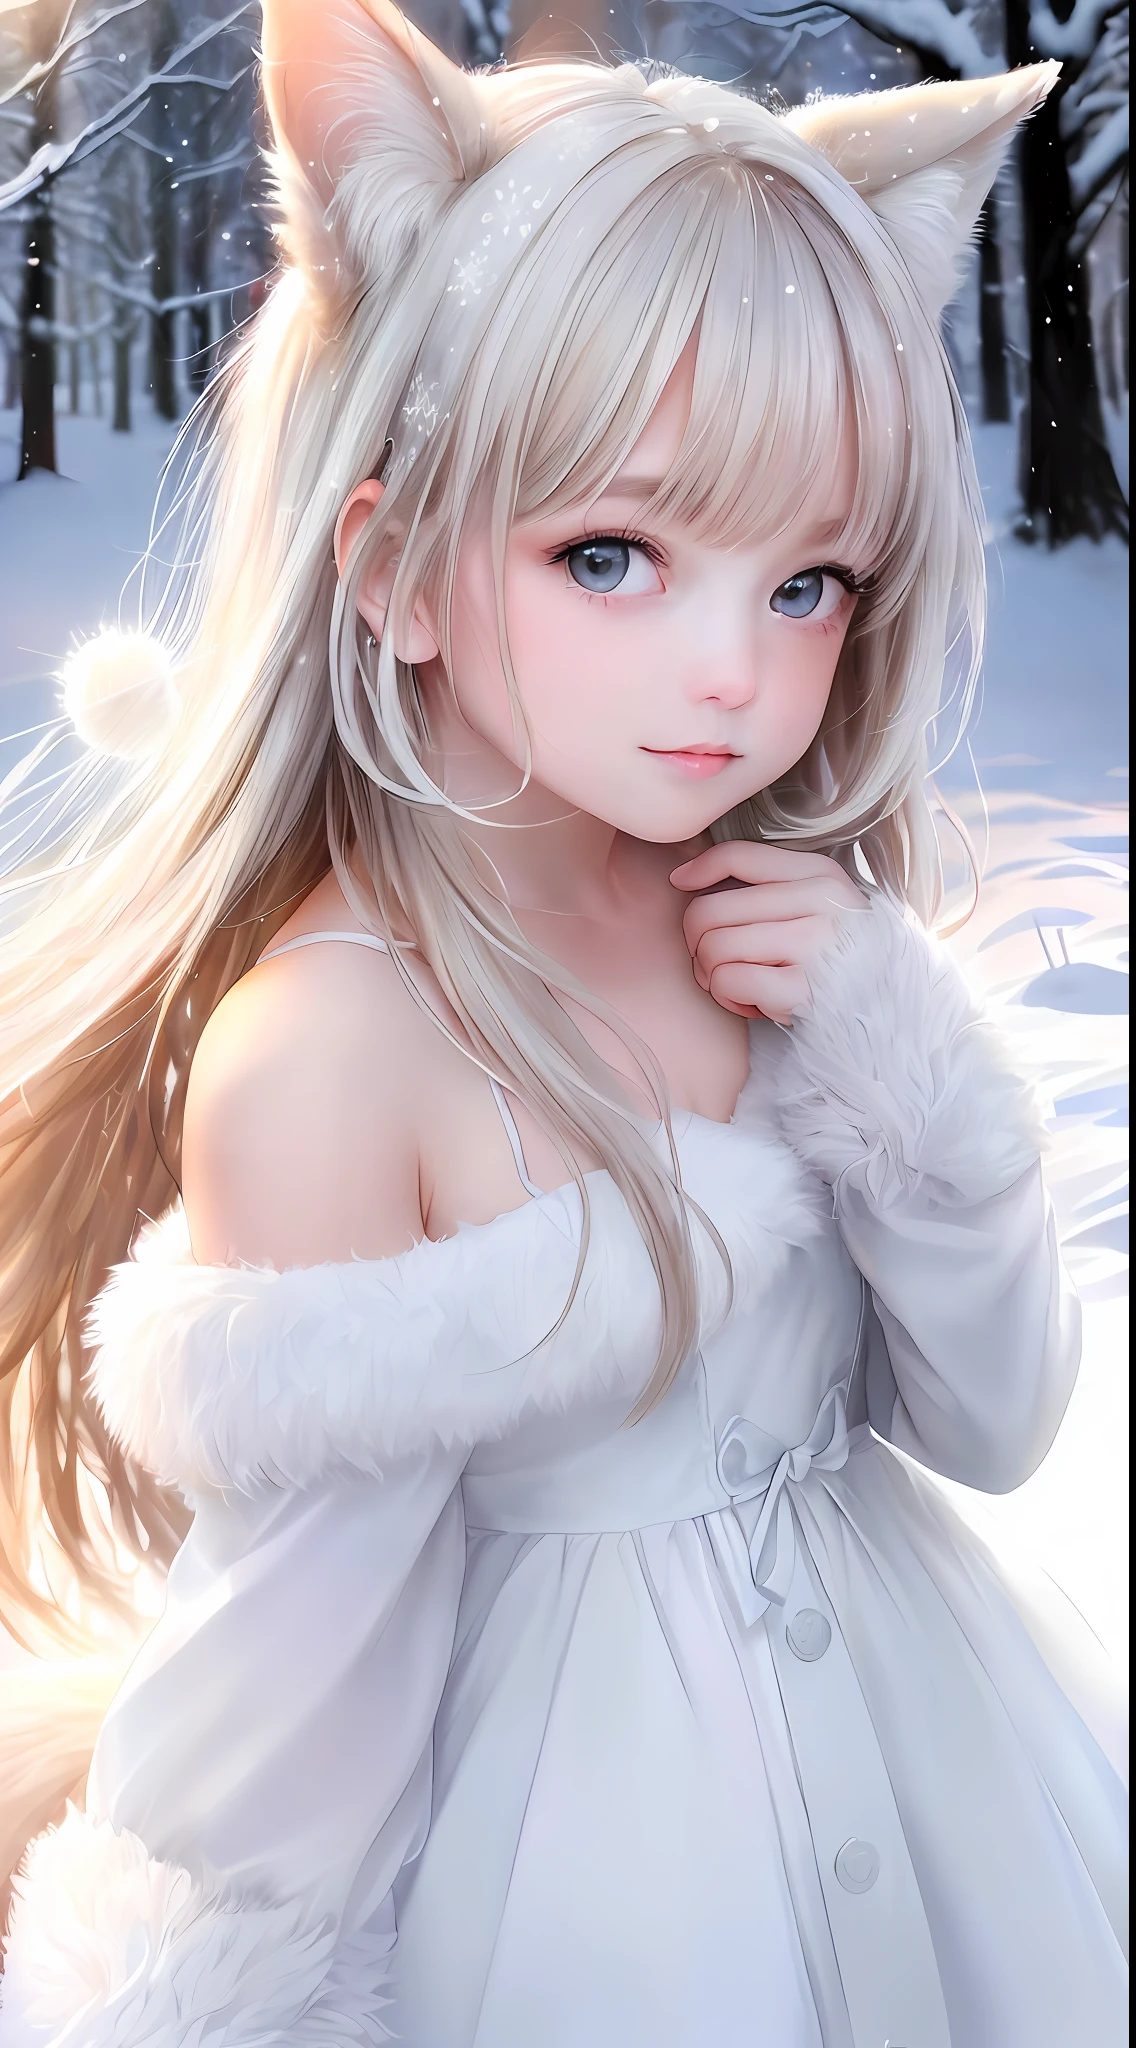 (raw photo:1.2), (photorealistic:1.4), (best quality:1.4), (ultra highres:1.2), (highly detailed:1.3), (HDR:1.2), (cinematic lighting:1.3), (detailed eyes), (facial details), (fur details), (snowy:1.2). ), Cute Little Fox, Standing, (3/4 Portrait: 1.2), (Furry Tail: 1.2), (Soft Fur: 1.2), (Moe: 1.2), (Looking at the Audience), (Innocent Expression), (Soft Light), (Dreamy), (Dream: 1.3), (Ethereal: 1.3), (Magic: 1.2), (Snowflake: 1.2), (Winter Wonderland: 1.3), (Whimsical: 1.2), (Fun: 1.2), Bust, Solo